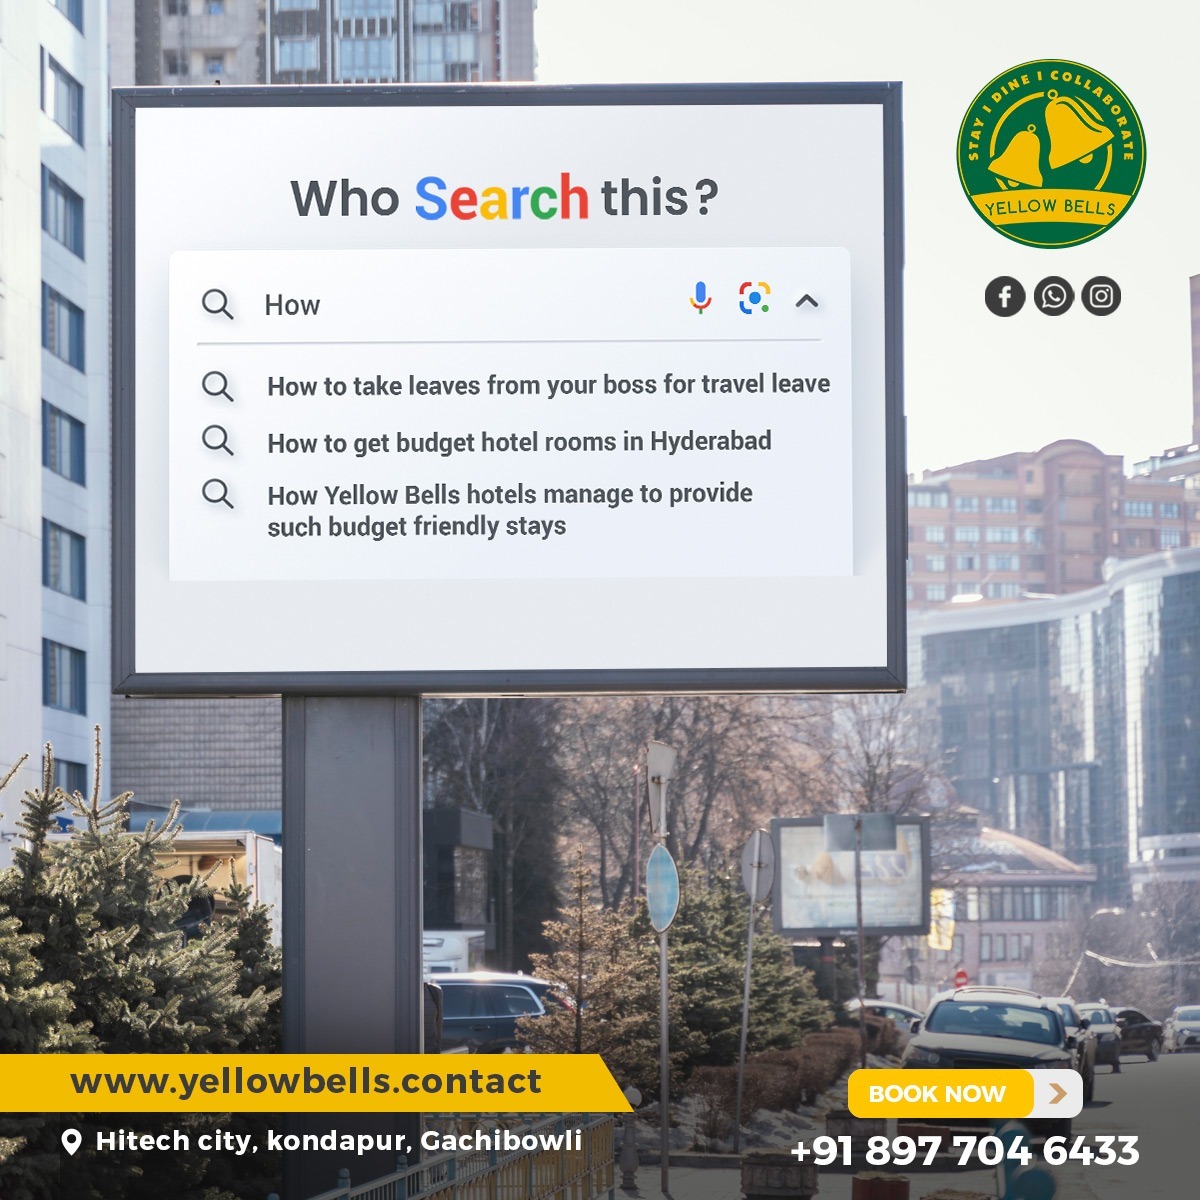 Do you also search all this in Google? If you search, tell us in the comments what you search ? 😜

If you haven't found any good hotel yet then Book your stay in Yellow Bells Hotels !!

Call us at: +91 89770 46433

#yellowbellshotels #hotels #search #hyderabadhotels #hyderabad